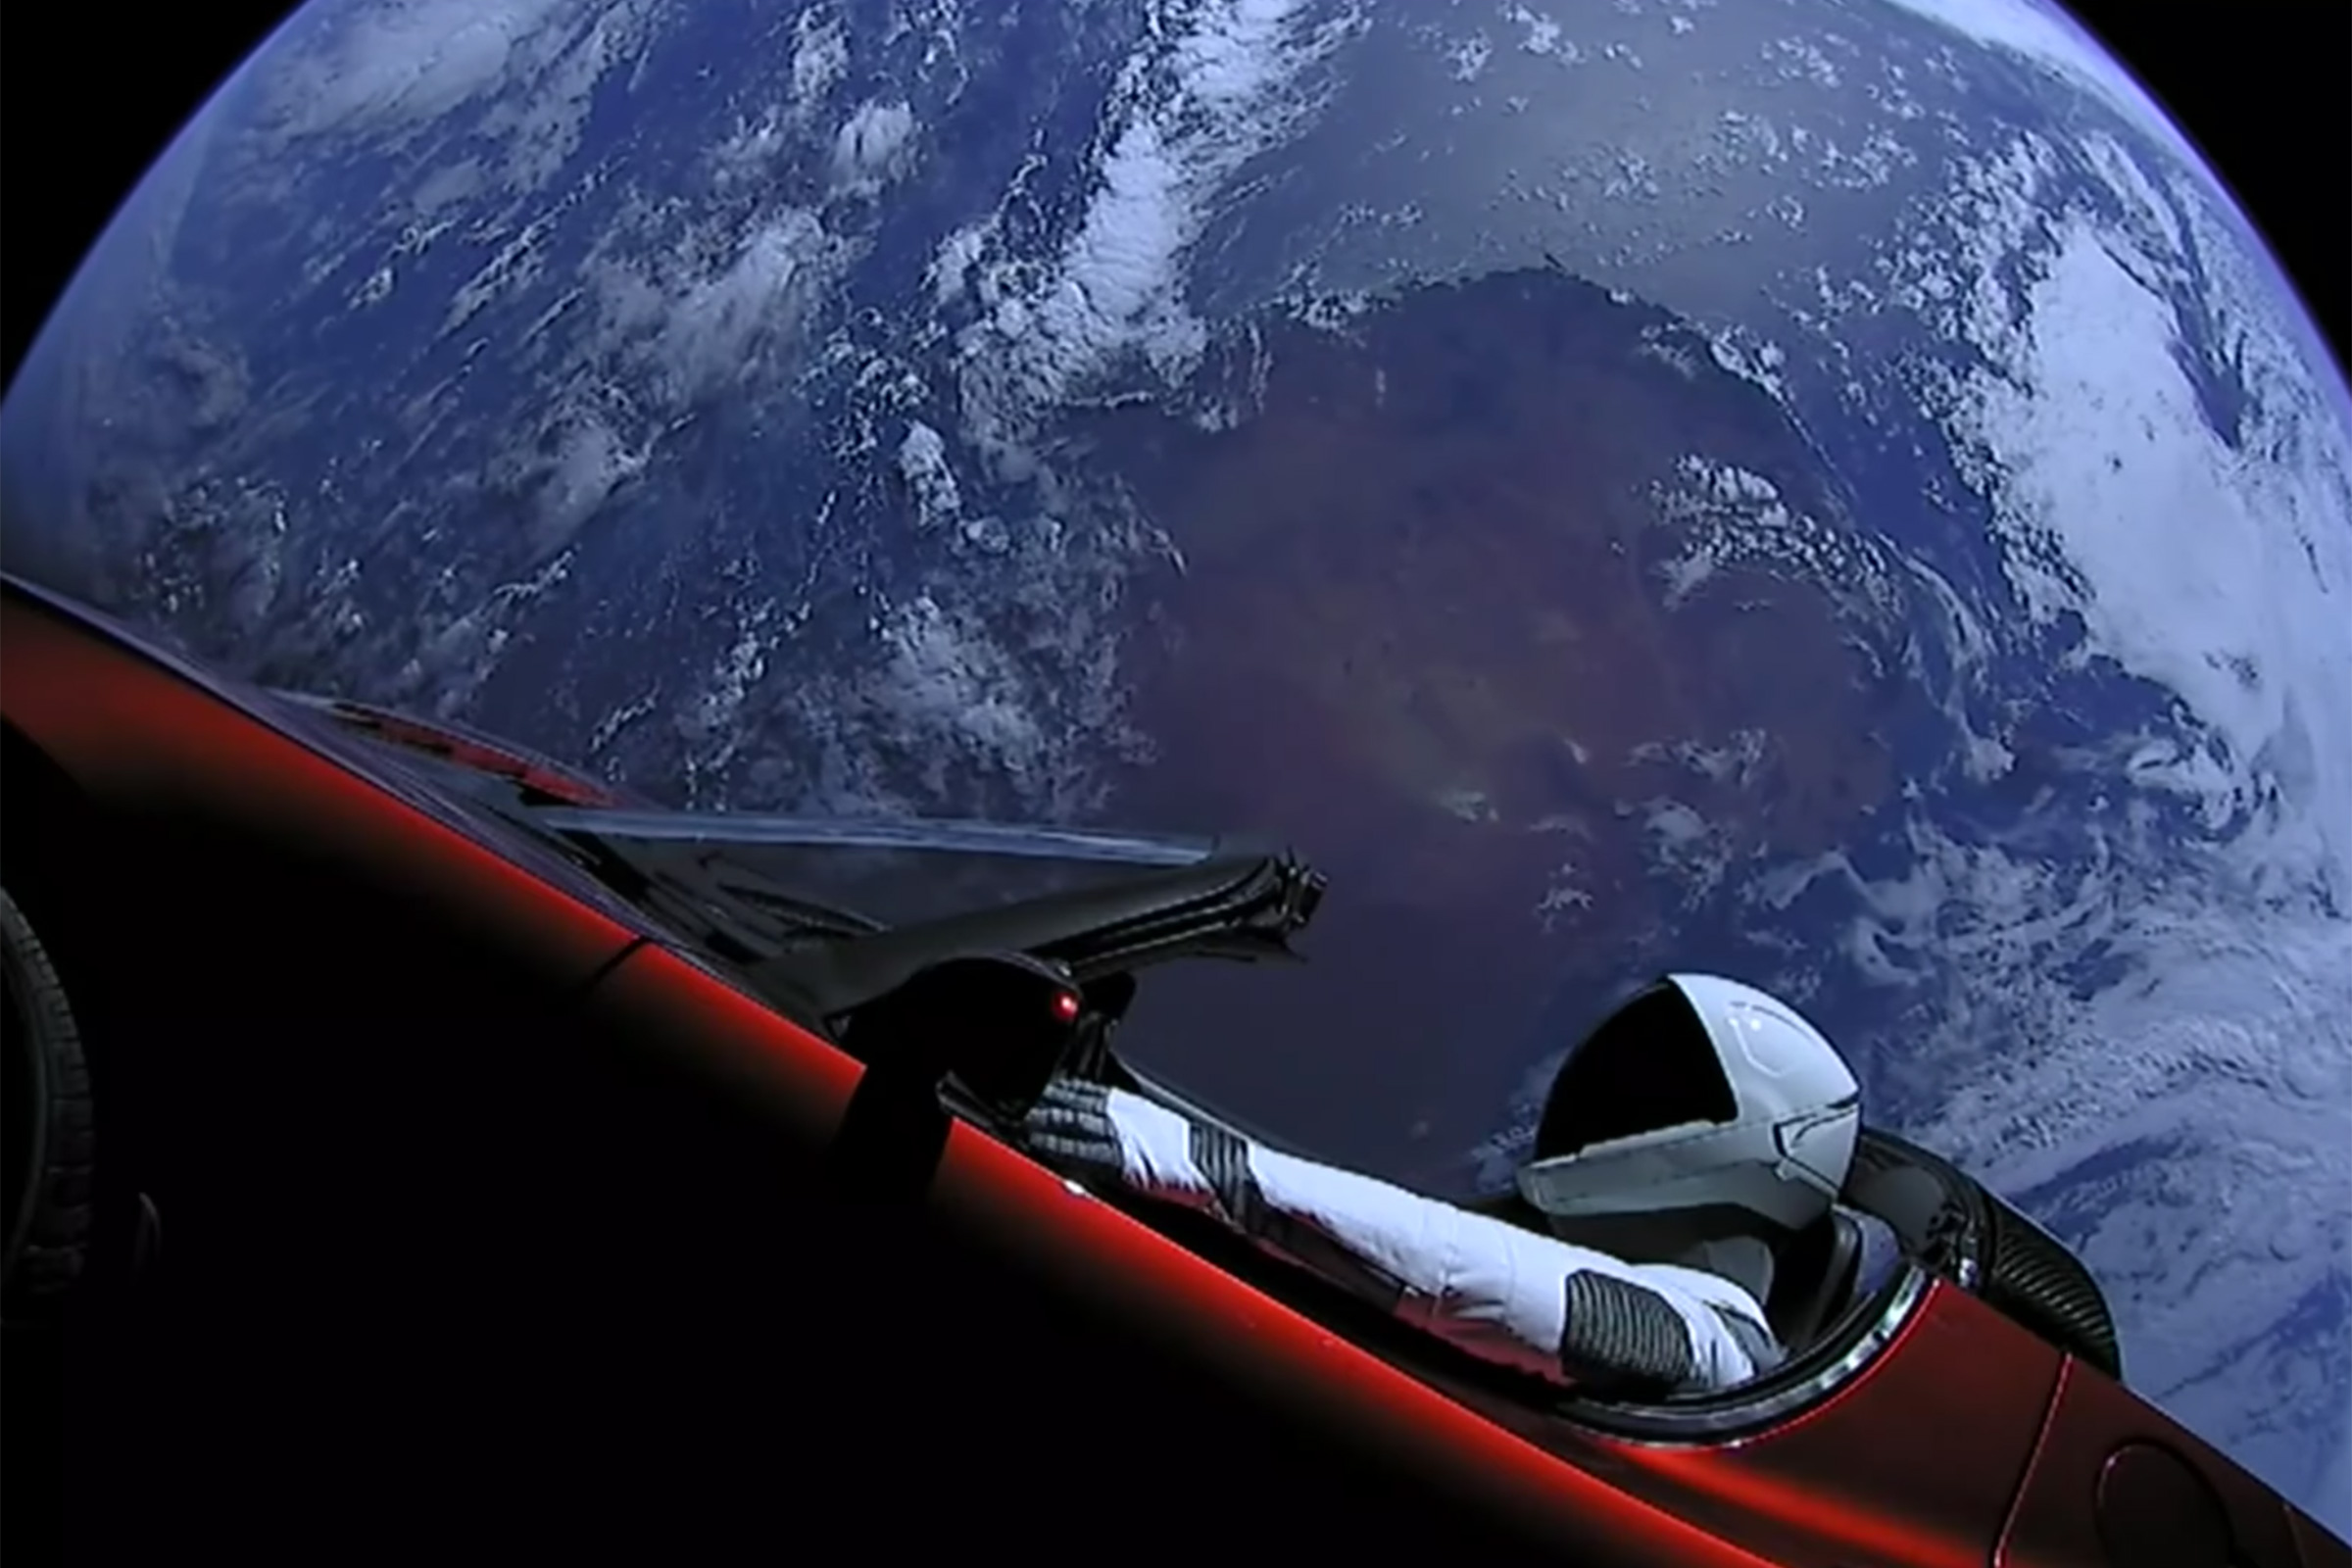 Elon Musk’s SpaceX launches Tesla Roadster into space Auto Express